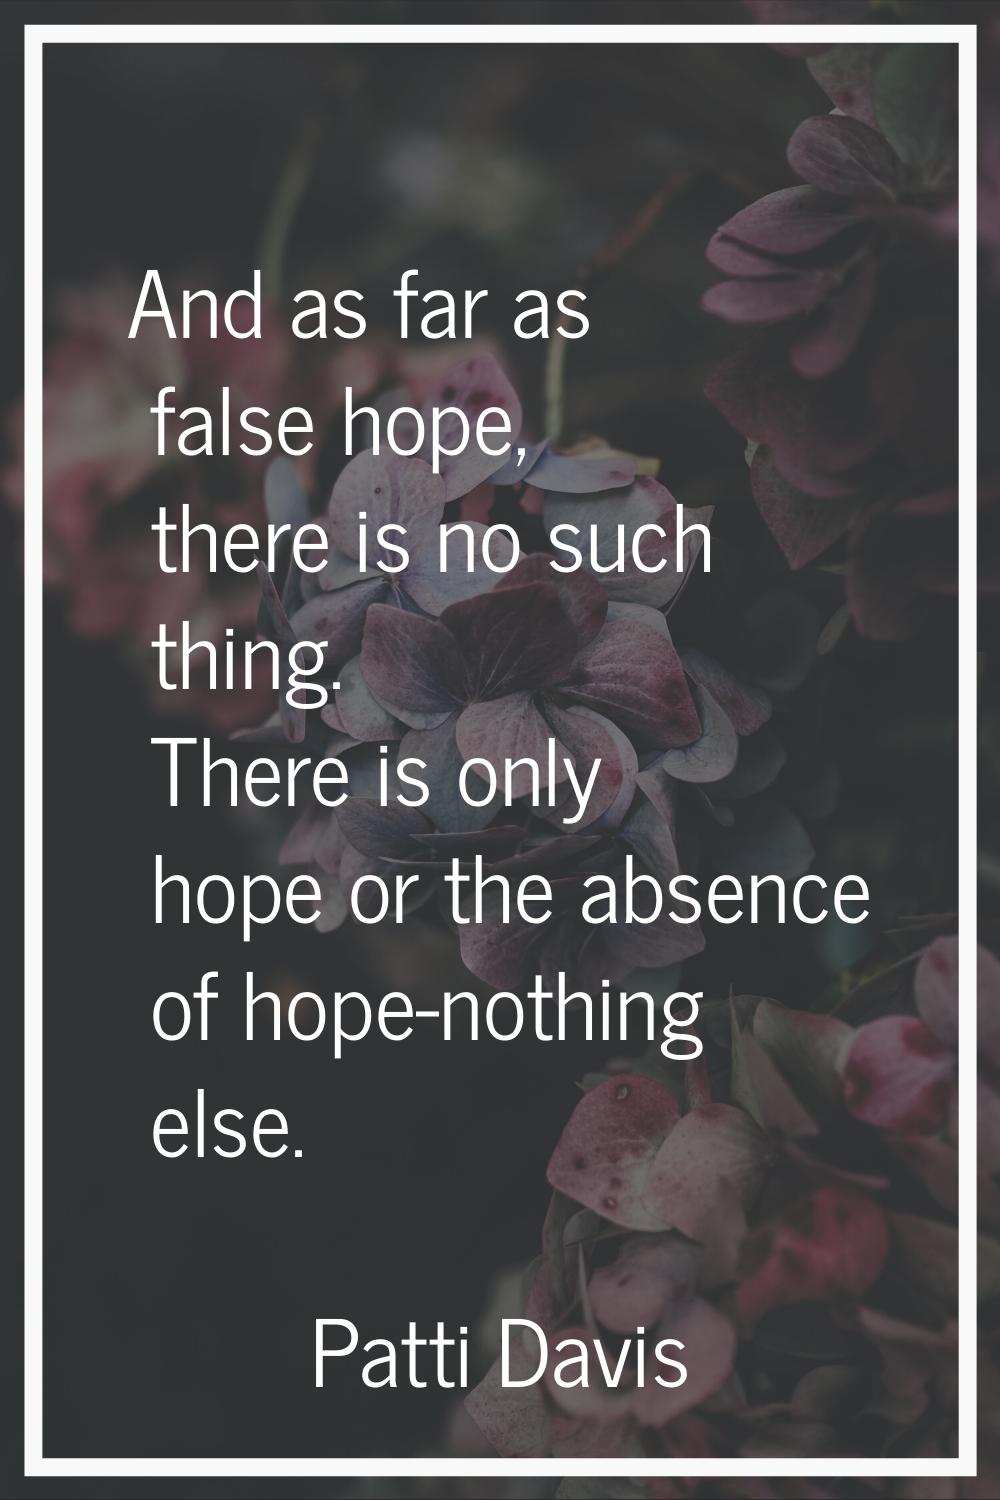 And as far as false hope, there is no such thing. There is only hope or the absence of hope-nothing